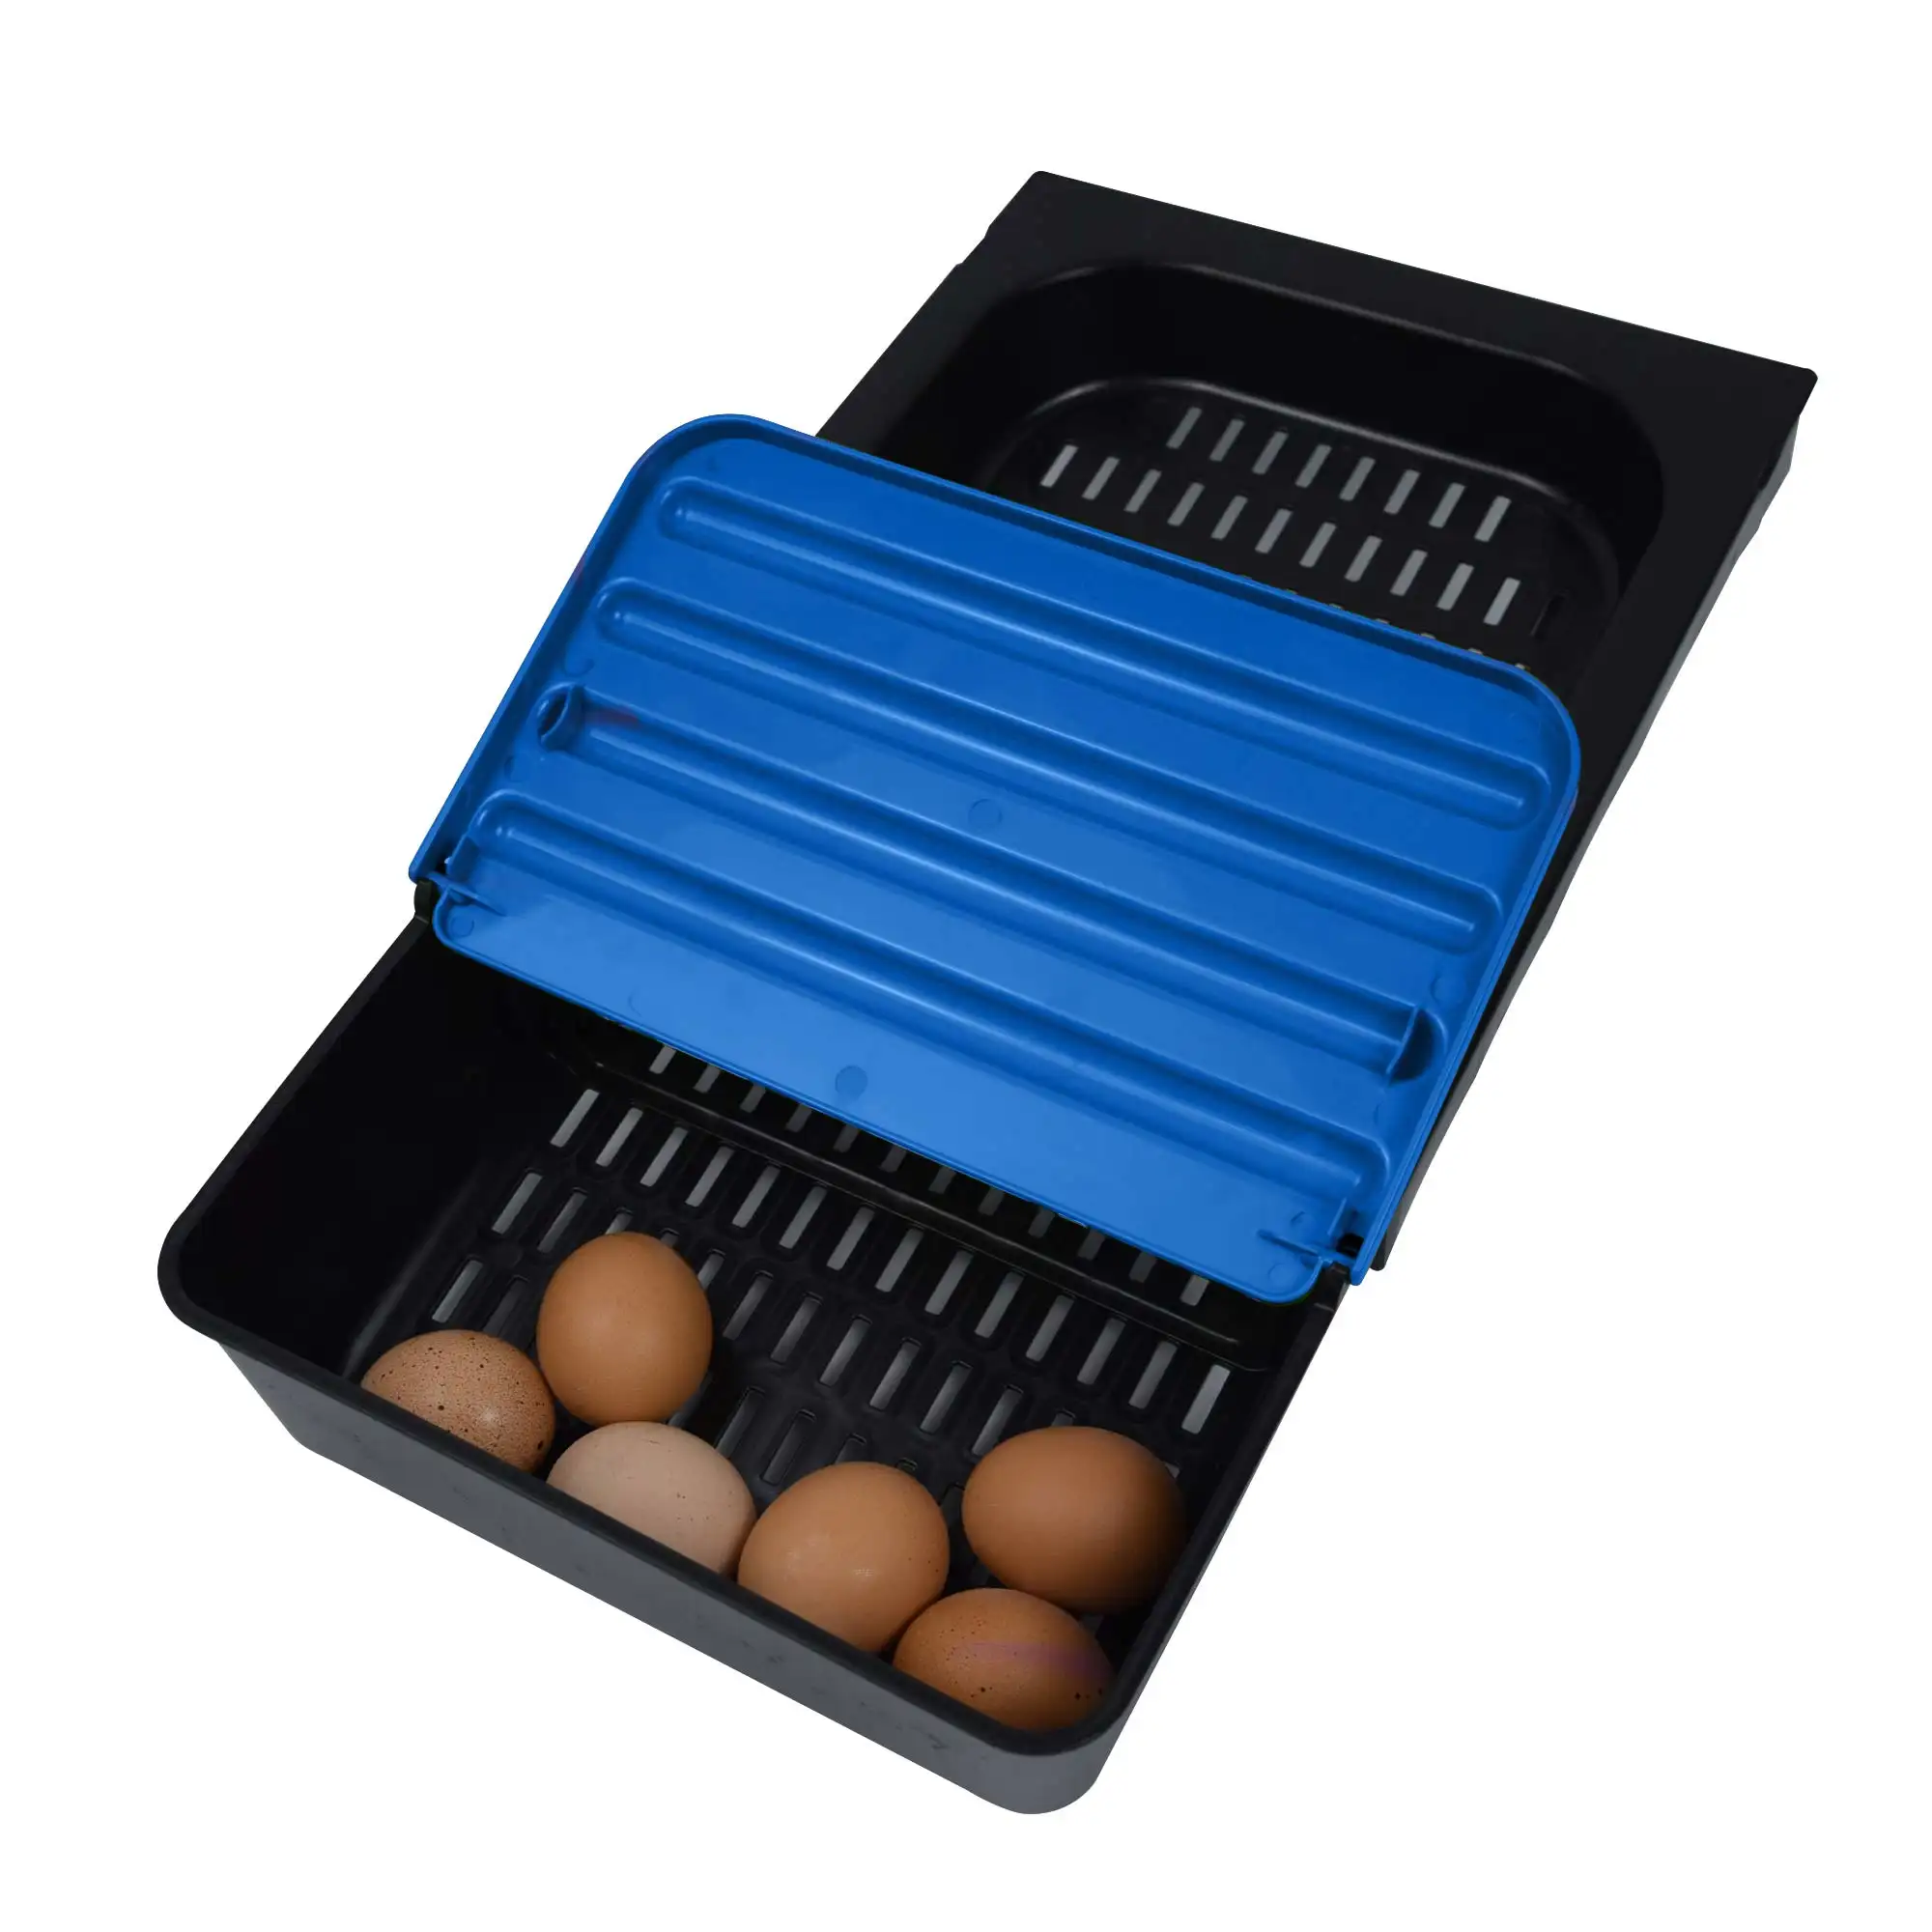 Innovative Egg Collecting Tray for Chicken Nest Box - No More Broken Eggs, Hassle-Free Retrieval